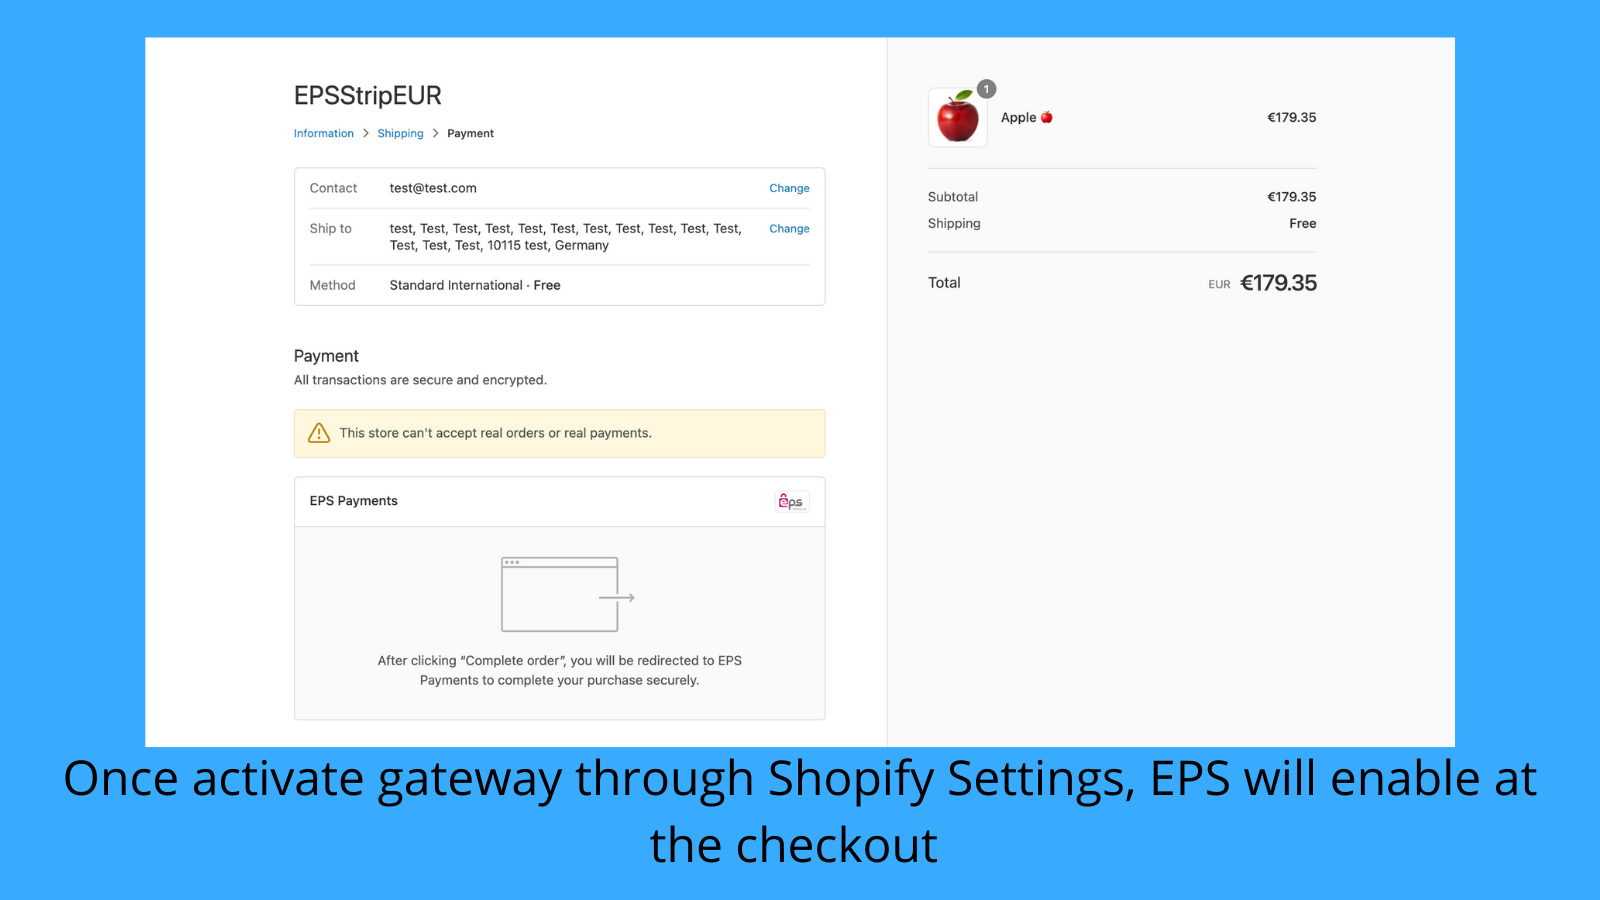 Enable EPS Payments through Shopify payment settings.